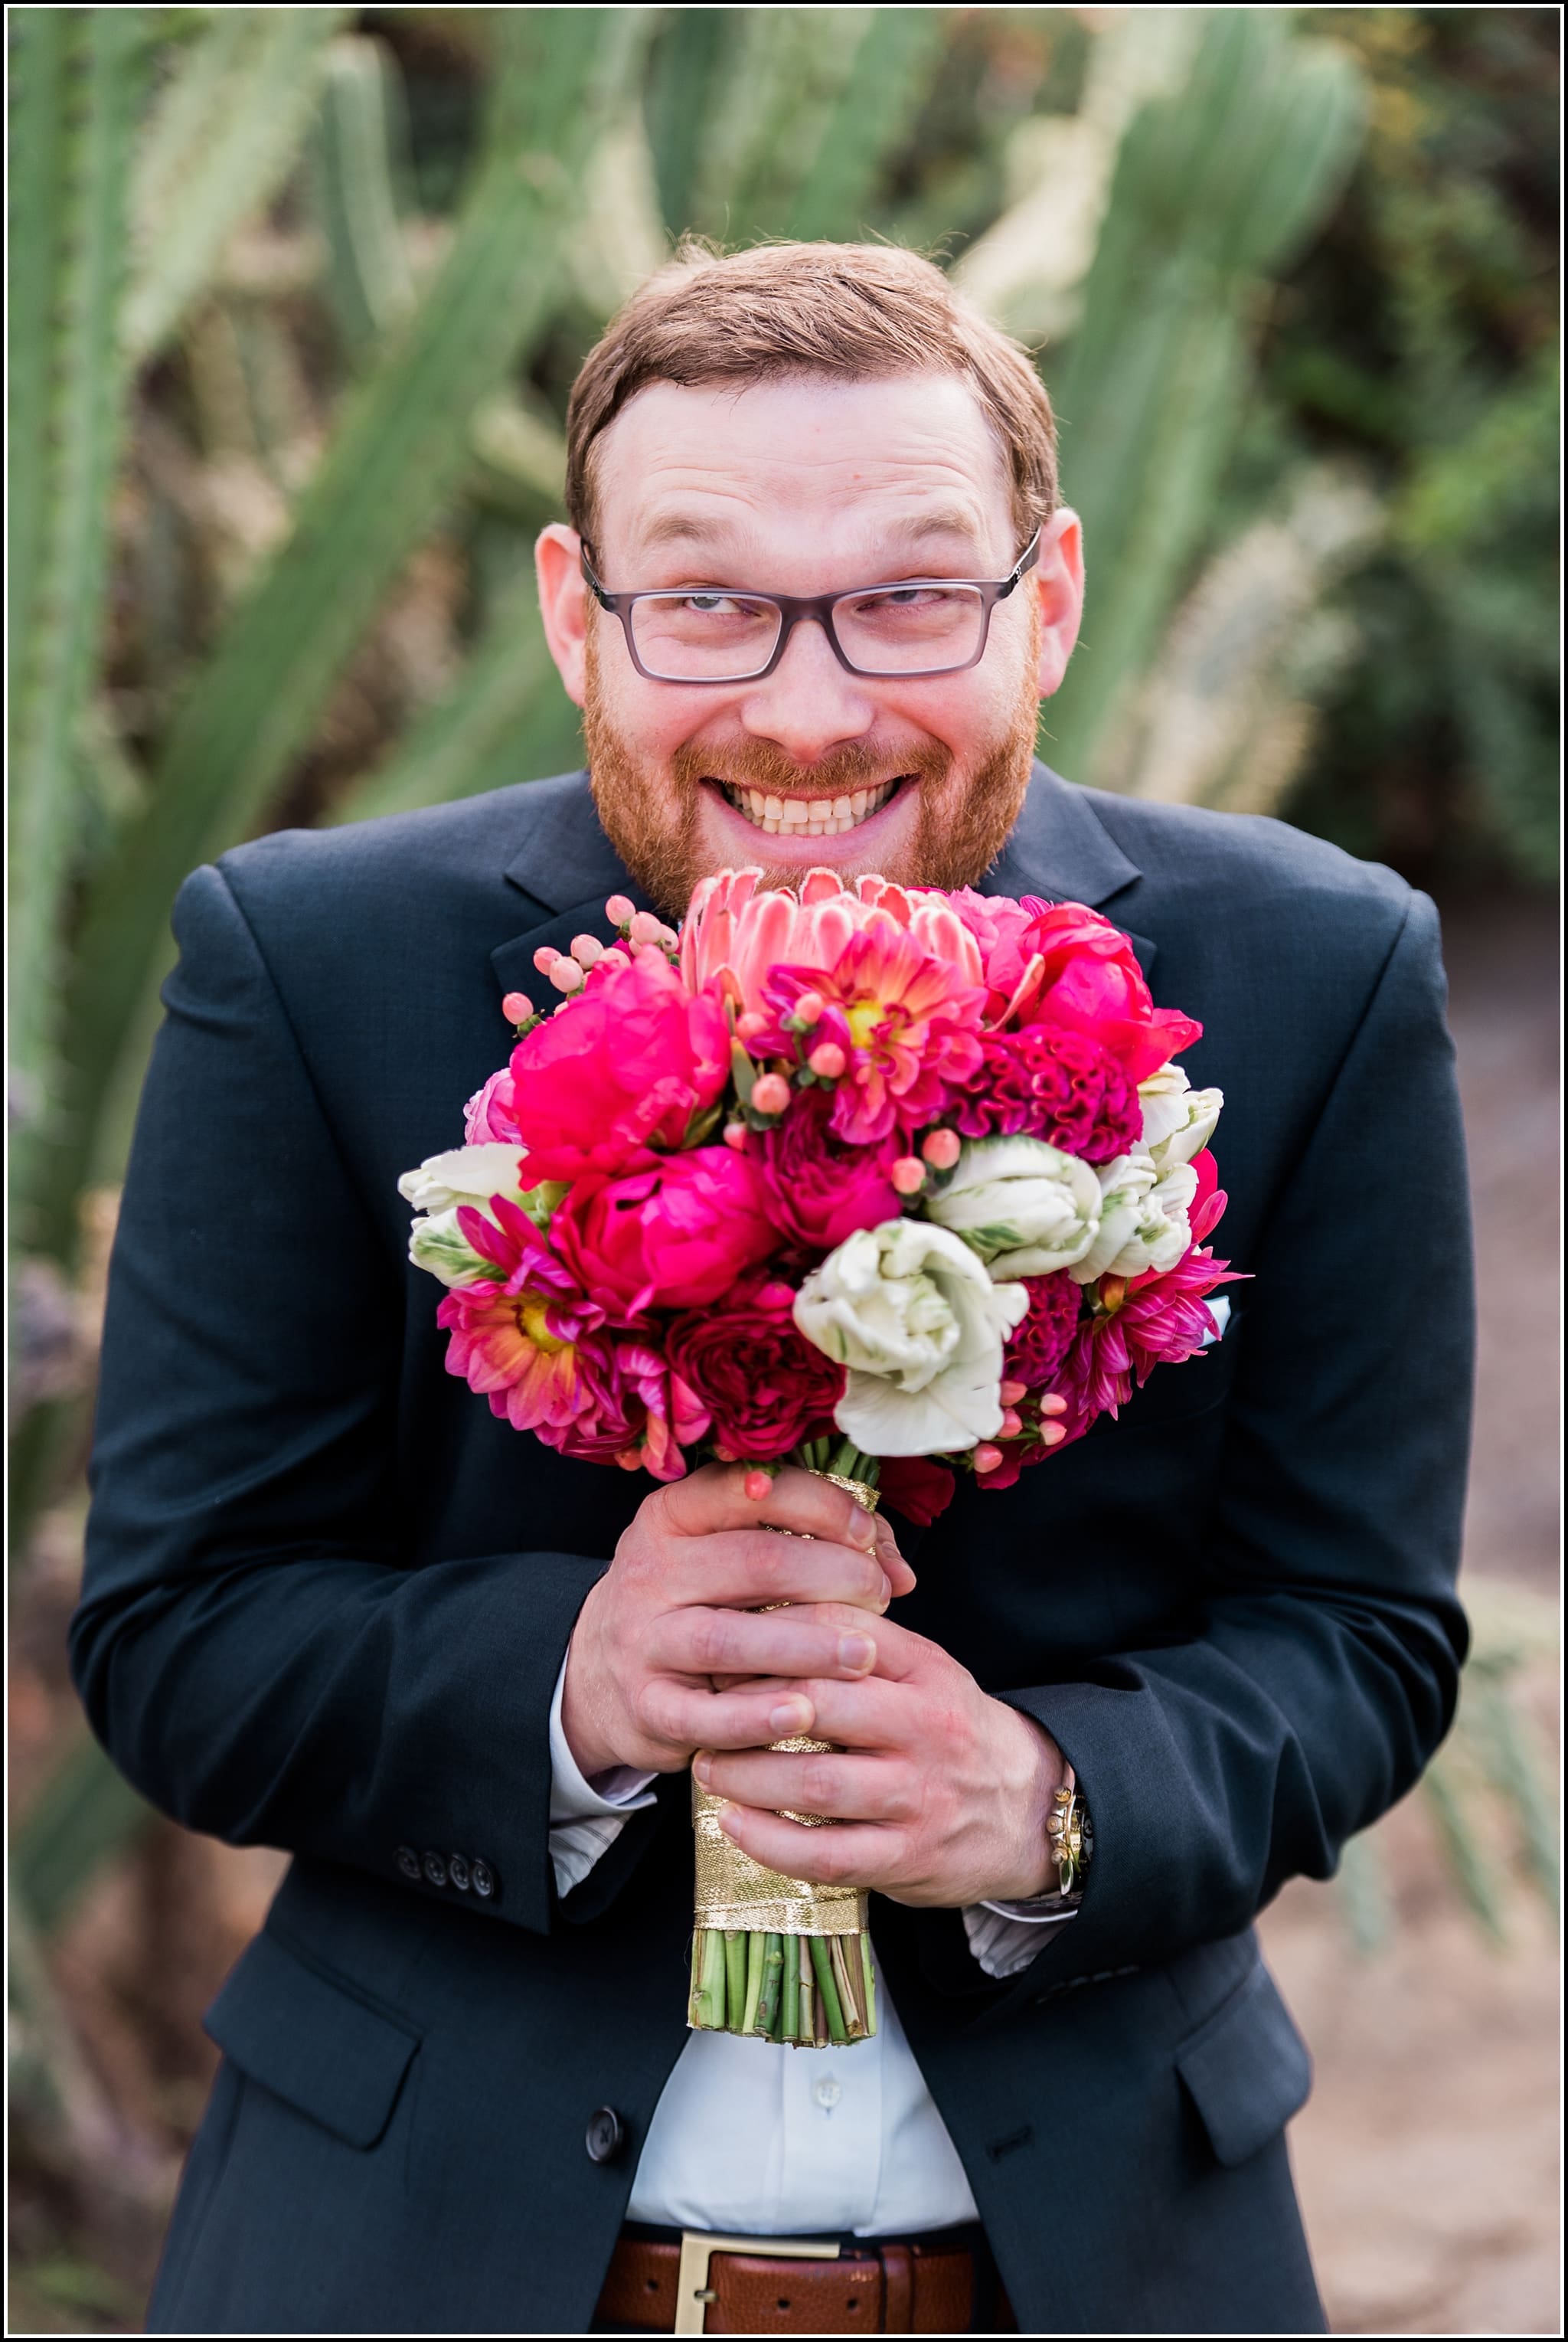  favorite wedding images 2016, wedding photos from 2016, our favorite wedding photos, groom with bouquet, pink bouquet